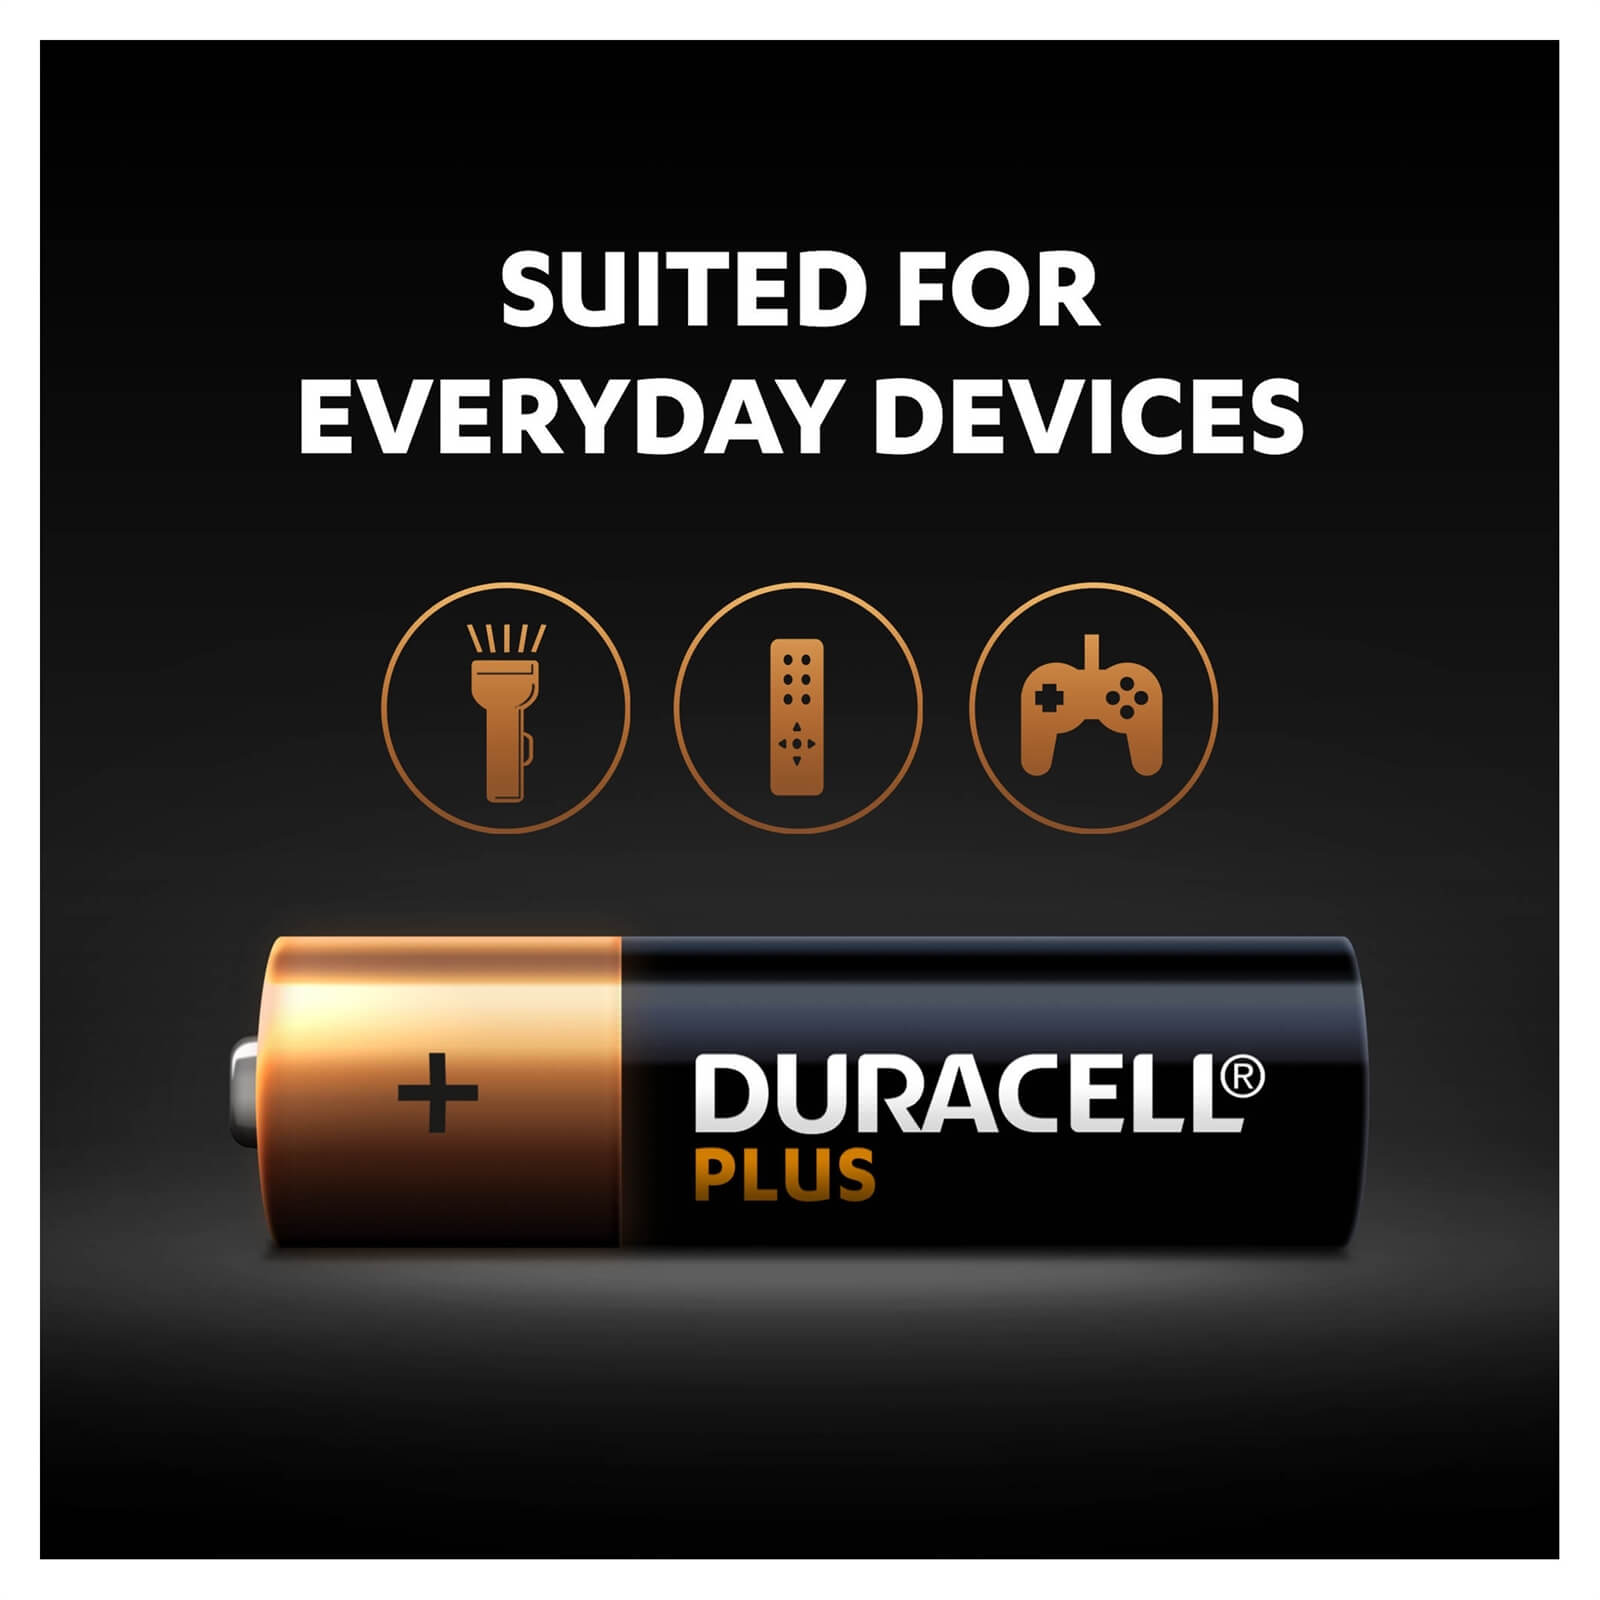 Duracell Plus AAA Batteries - 12 Pack